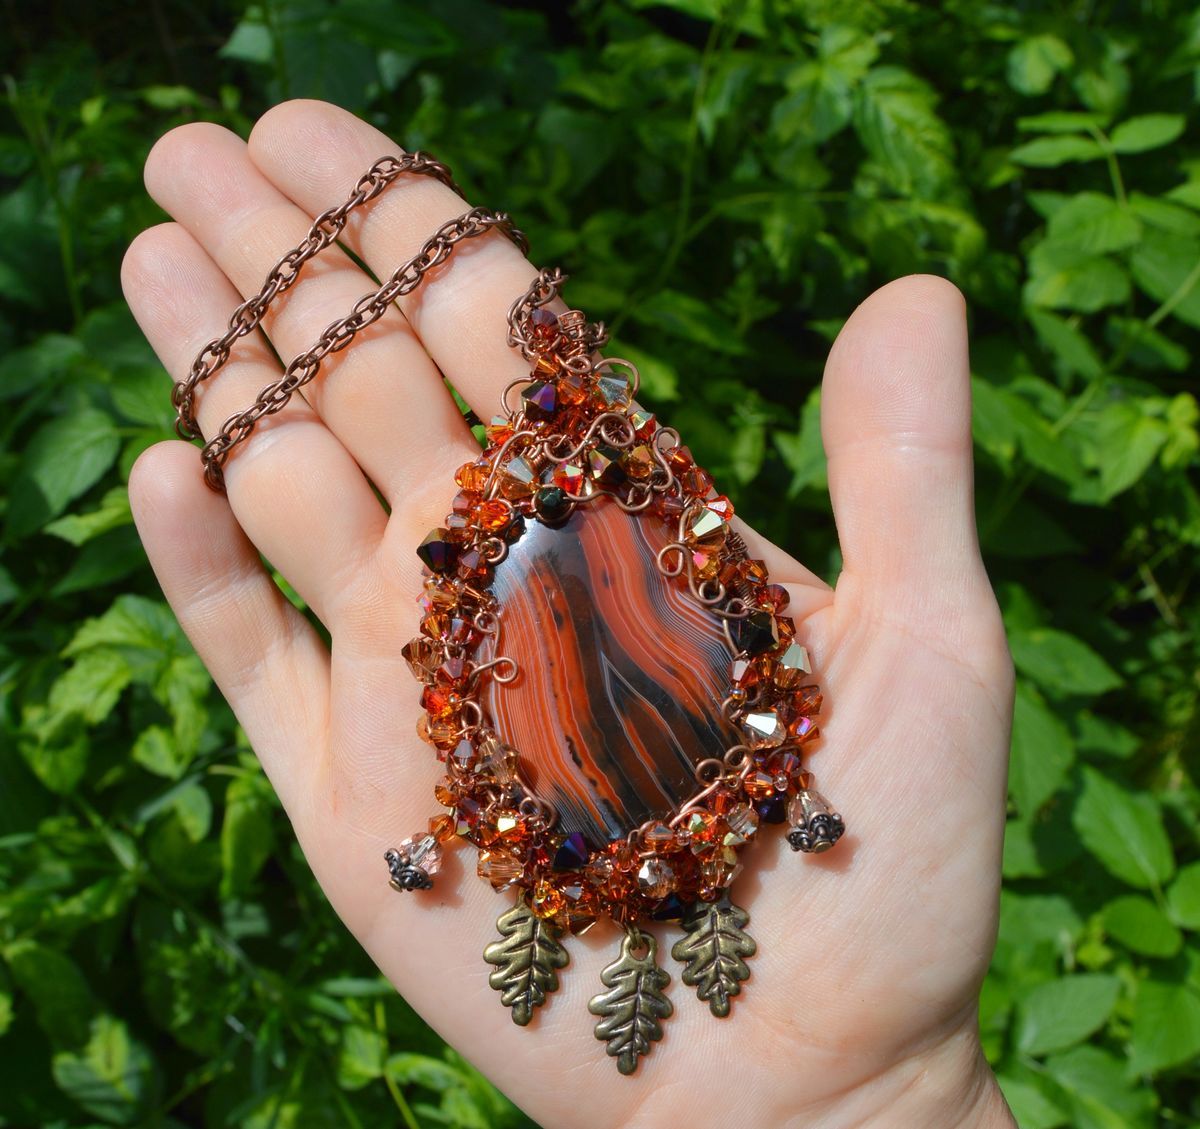 Autumn Leaf Pendant In Fall Colors – Elven Wire Wrapped Crystal Pertaining To Current Multi Colored Crystal Patterns Of Frost Pendant Necklaces (View 15 of 25)